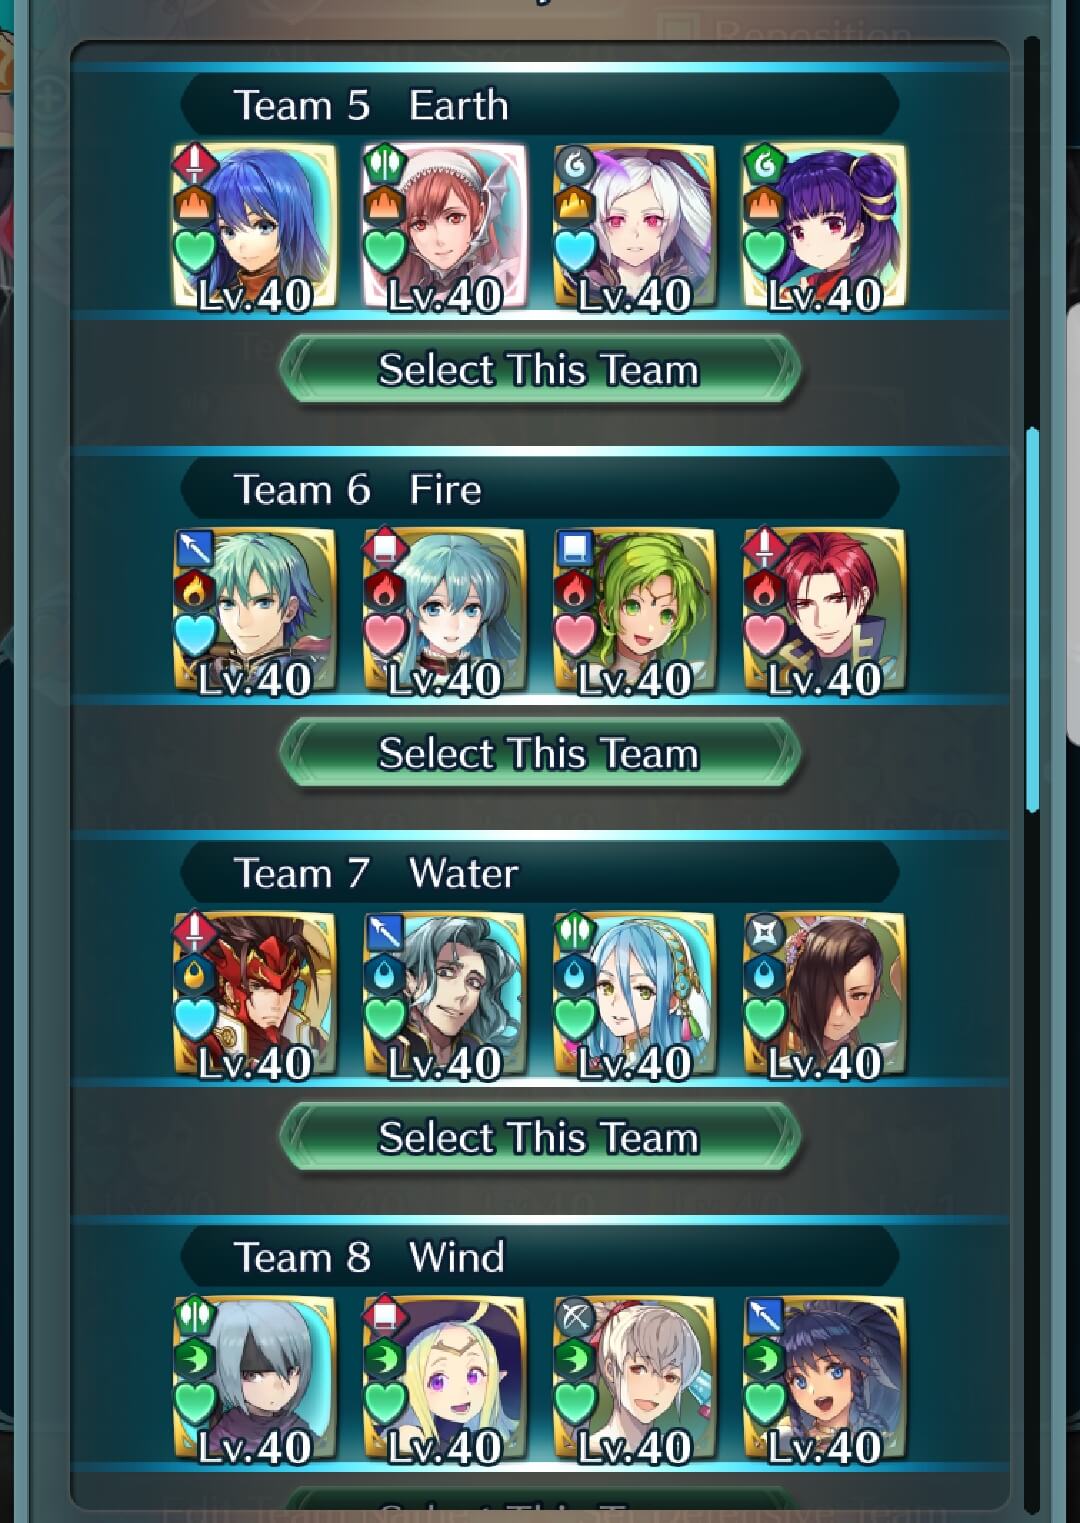 It's good to have sub teams devoted to each individual blessing